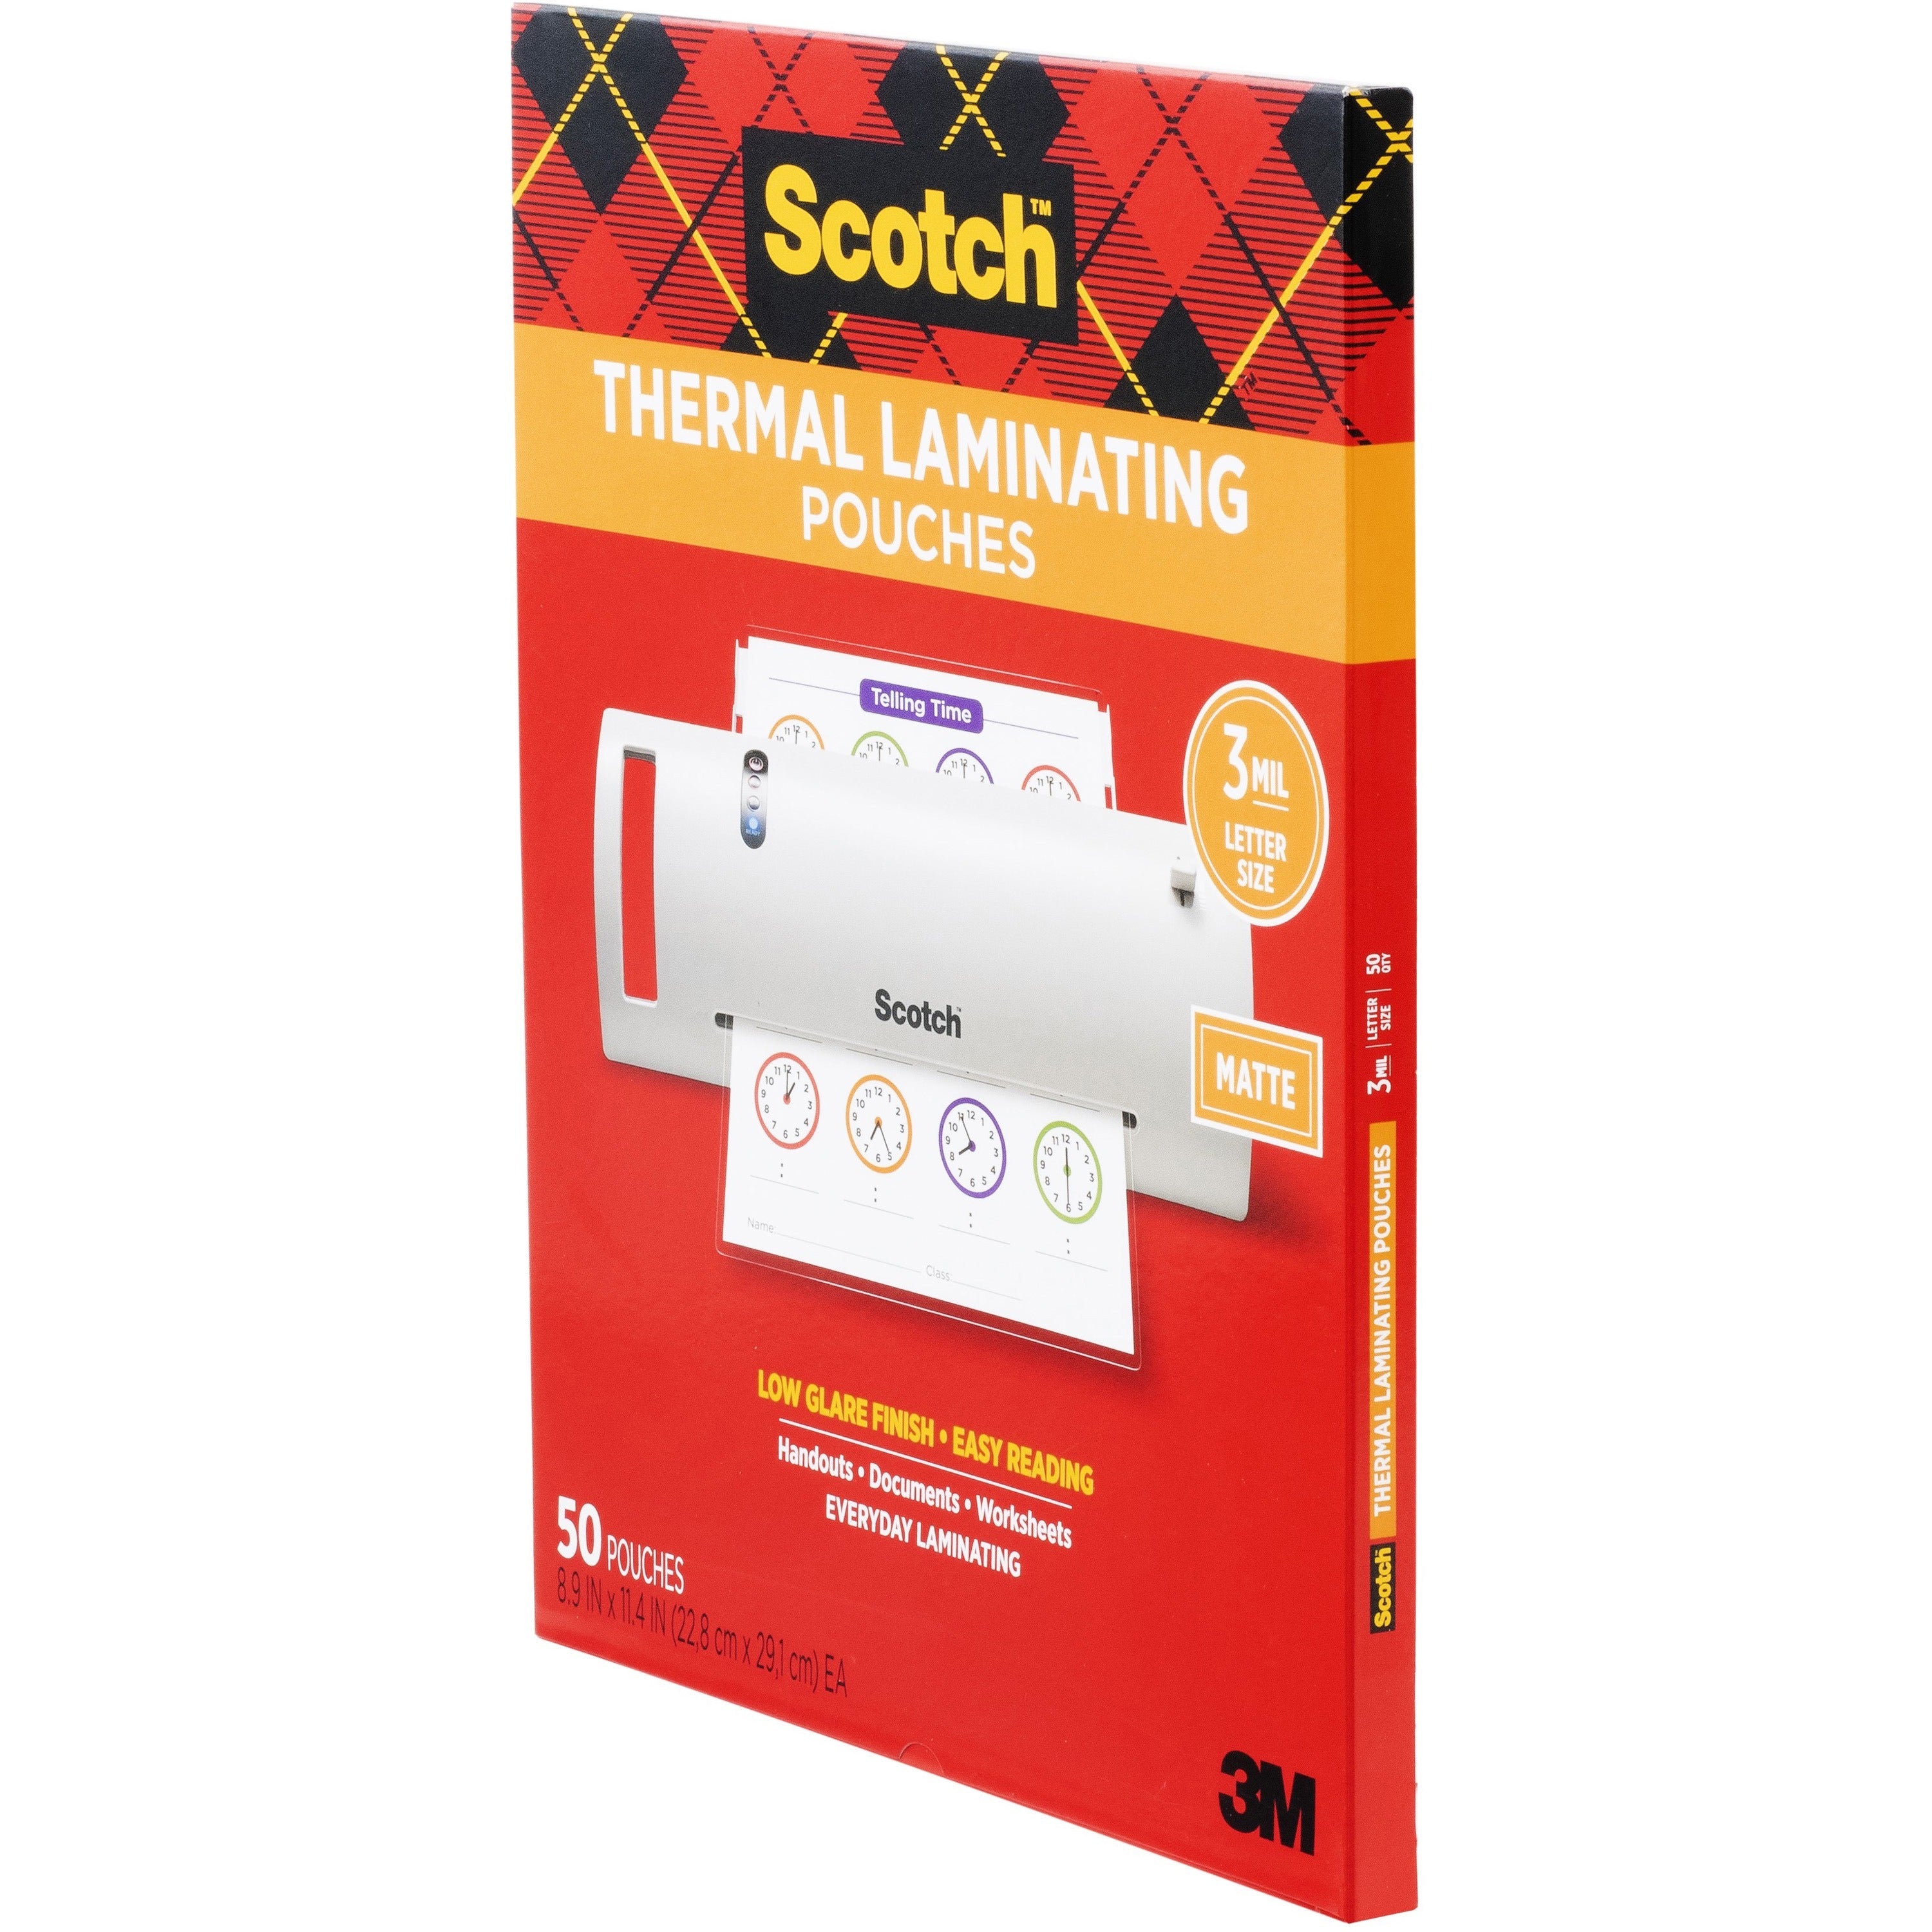 scotch-laminating-pouch-laminating-pouch-sheet-size-890-width-x-1140-length-x-3-mil-thickness-for-laminator-document-award-sign-calendar-certificate-artwork-schedule-double-sided-clear-1-pack_mmmtp385450m - 2